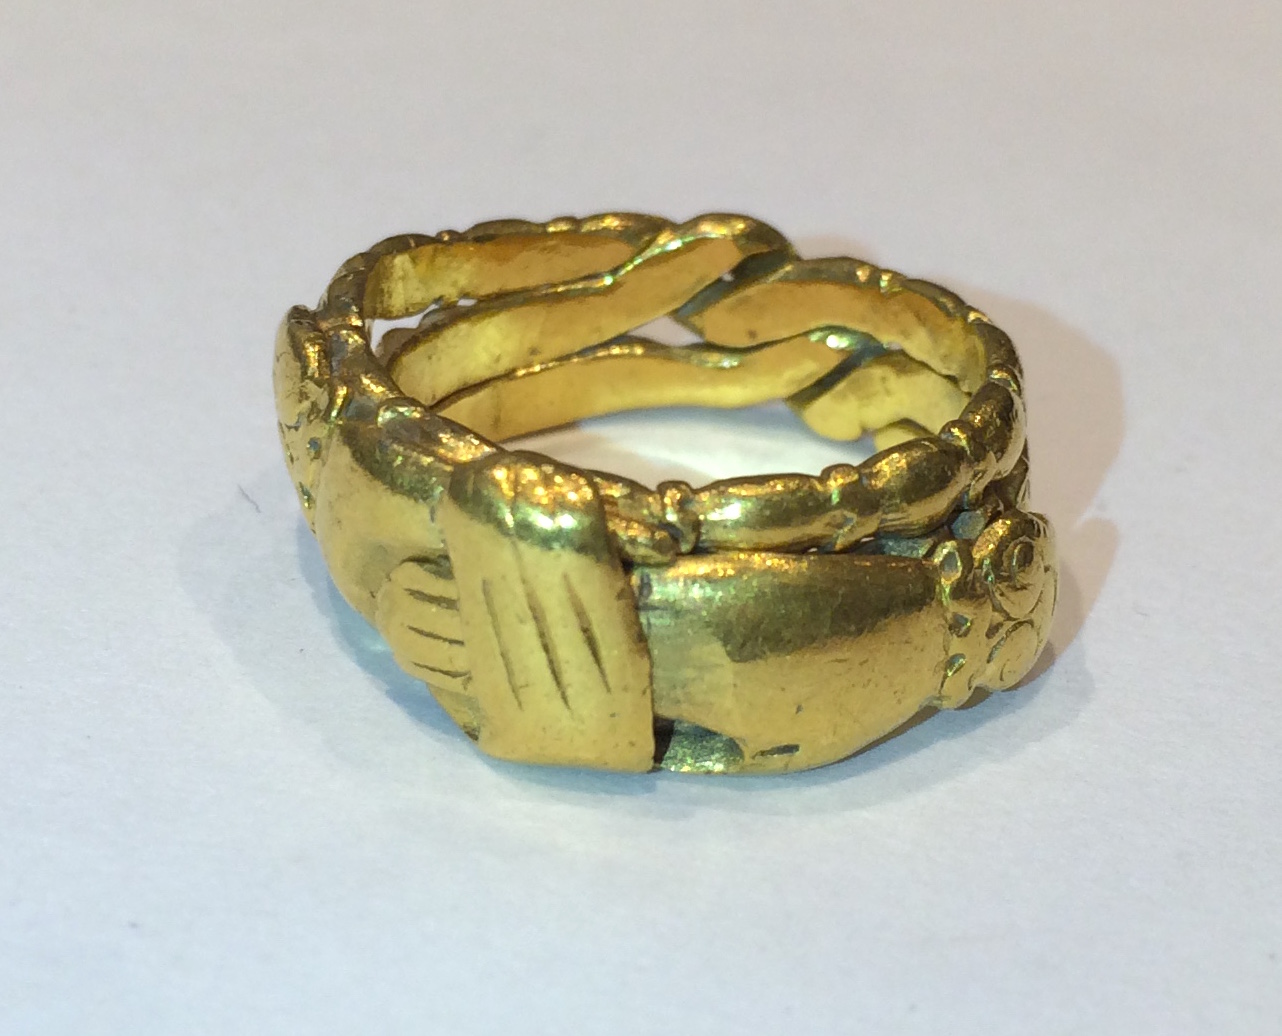 Chinese “Hands of Buddha” puzzle ring, 24K gold, c. 1900